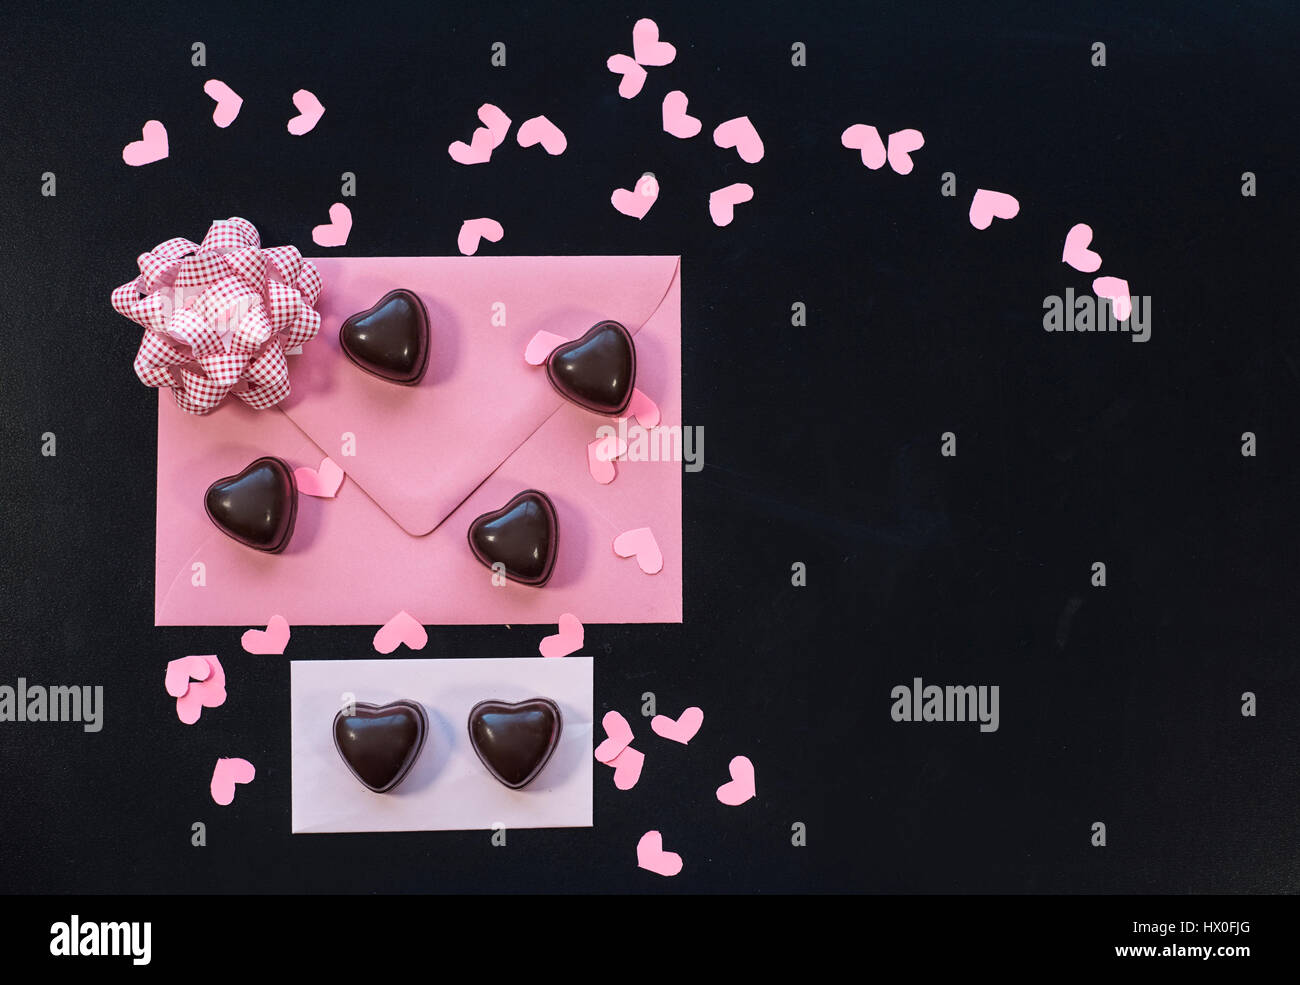 Lots of hearts on black background Stock Photo